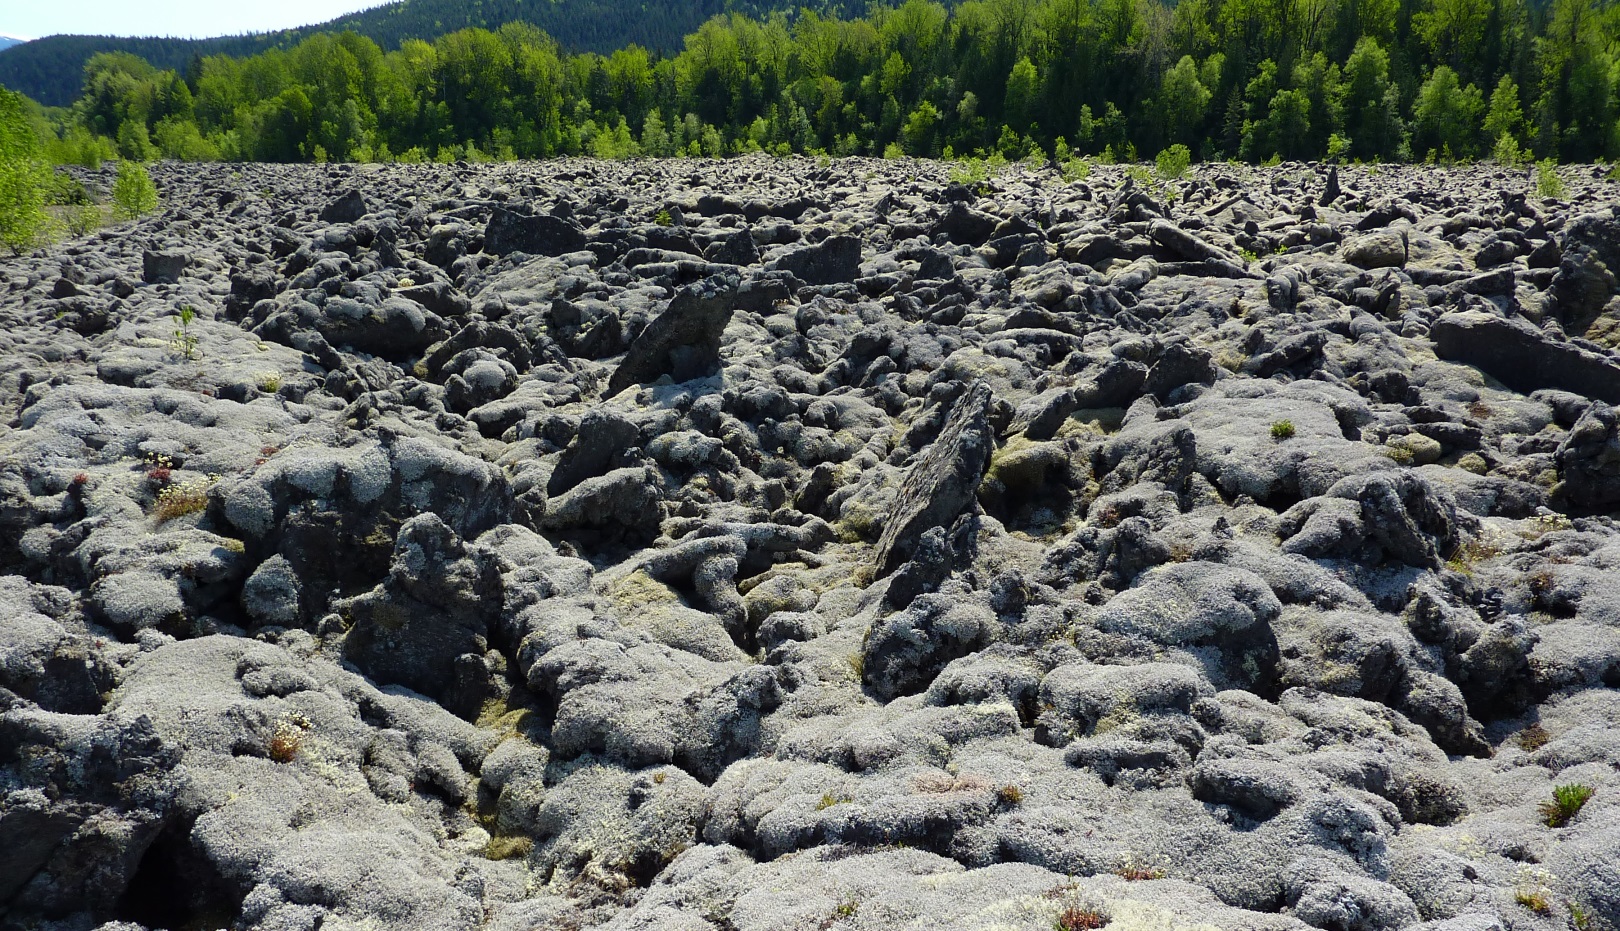 A field of grey rocks molded together to form large, uneven bumps